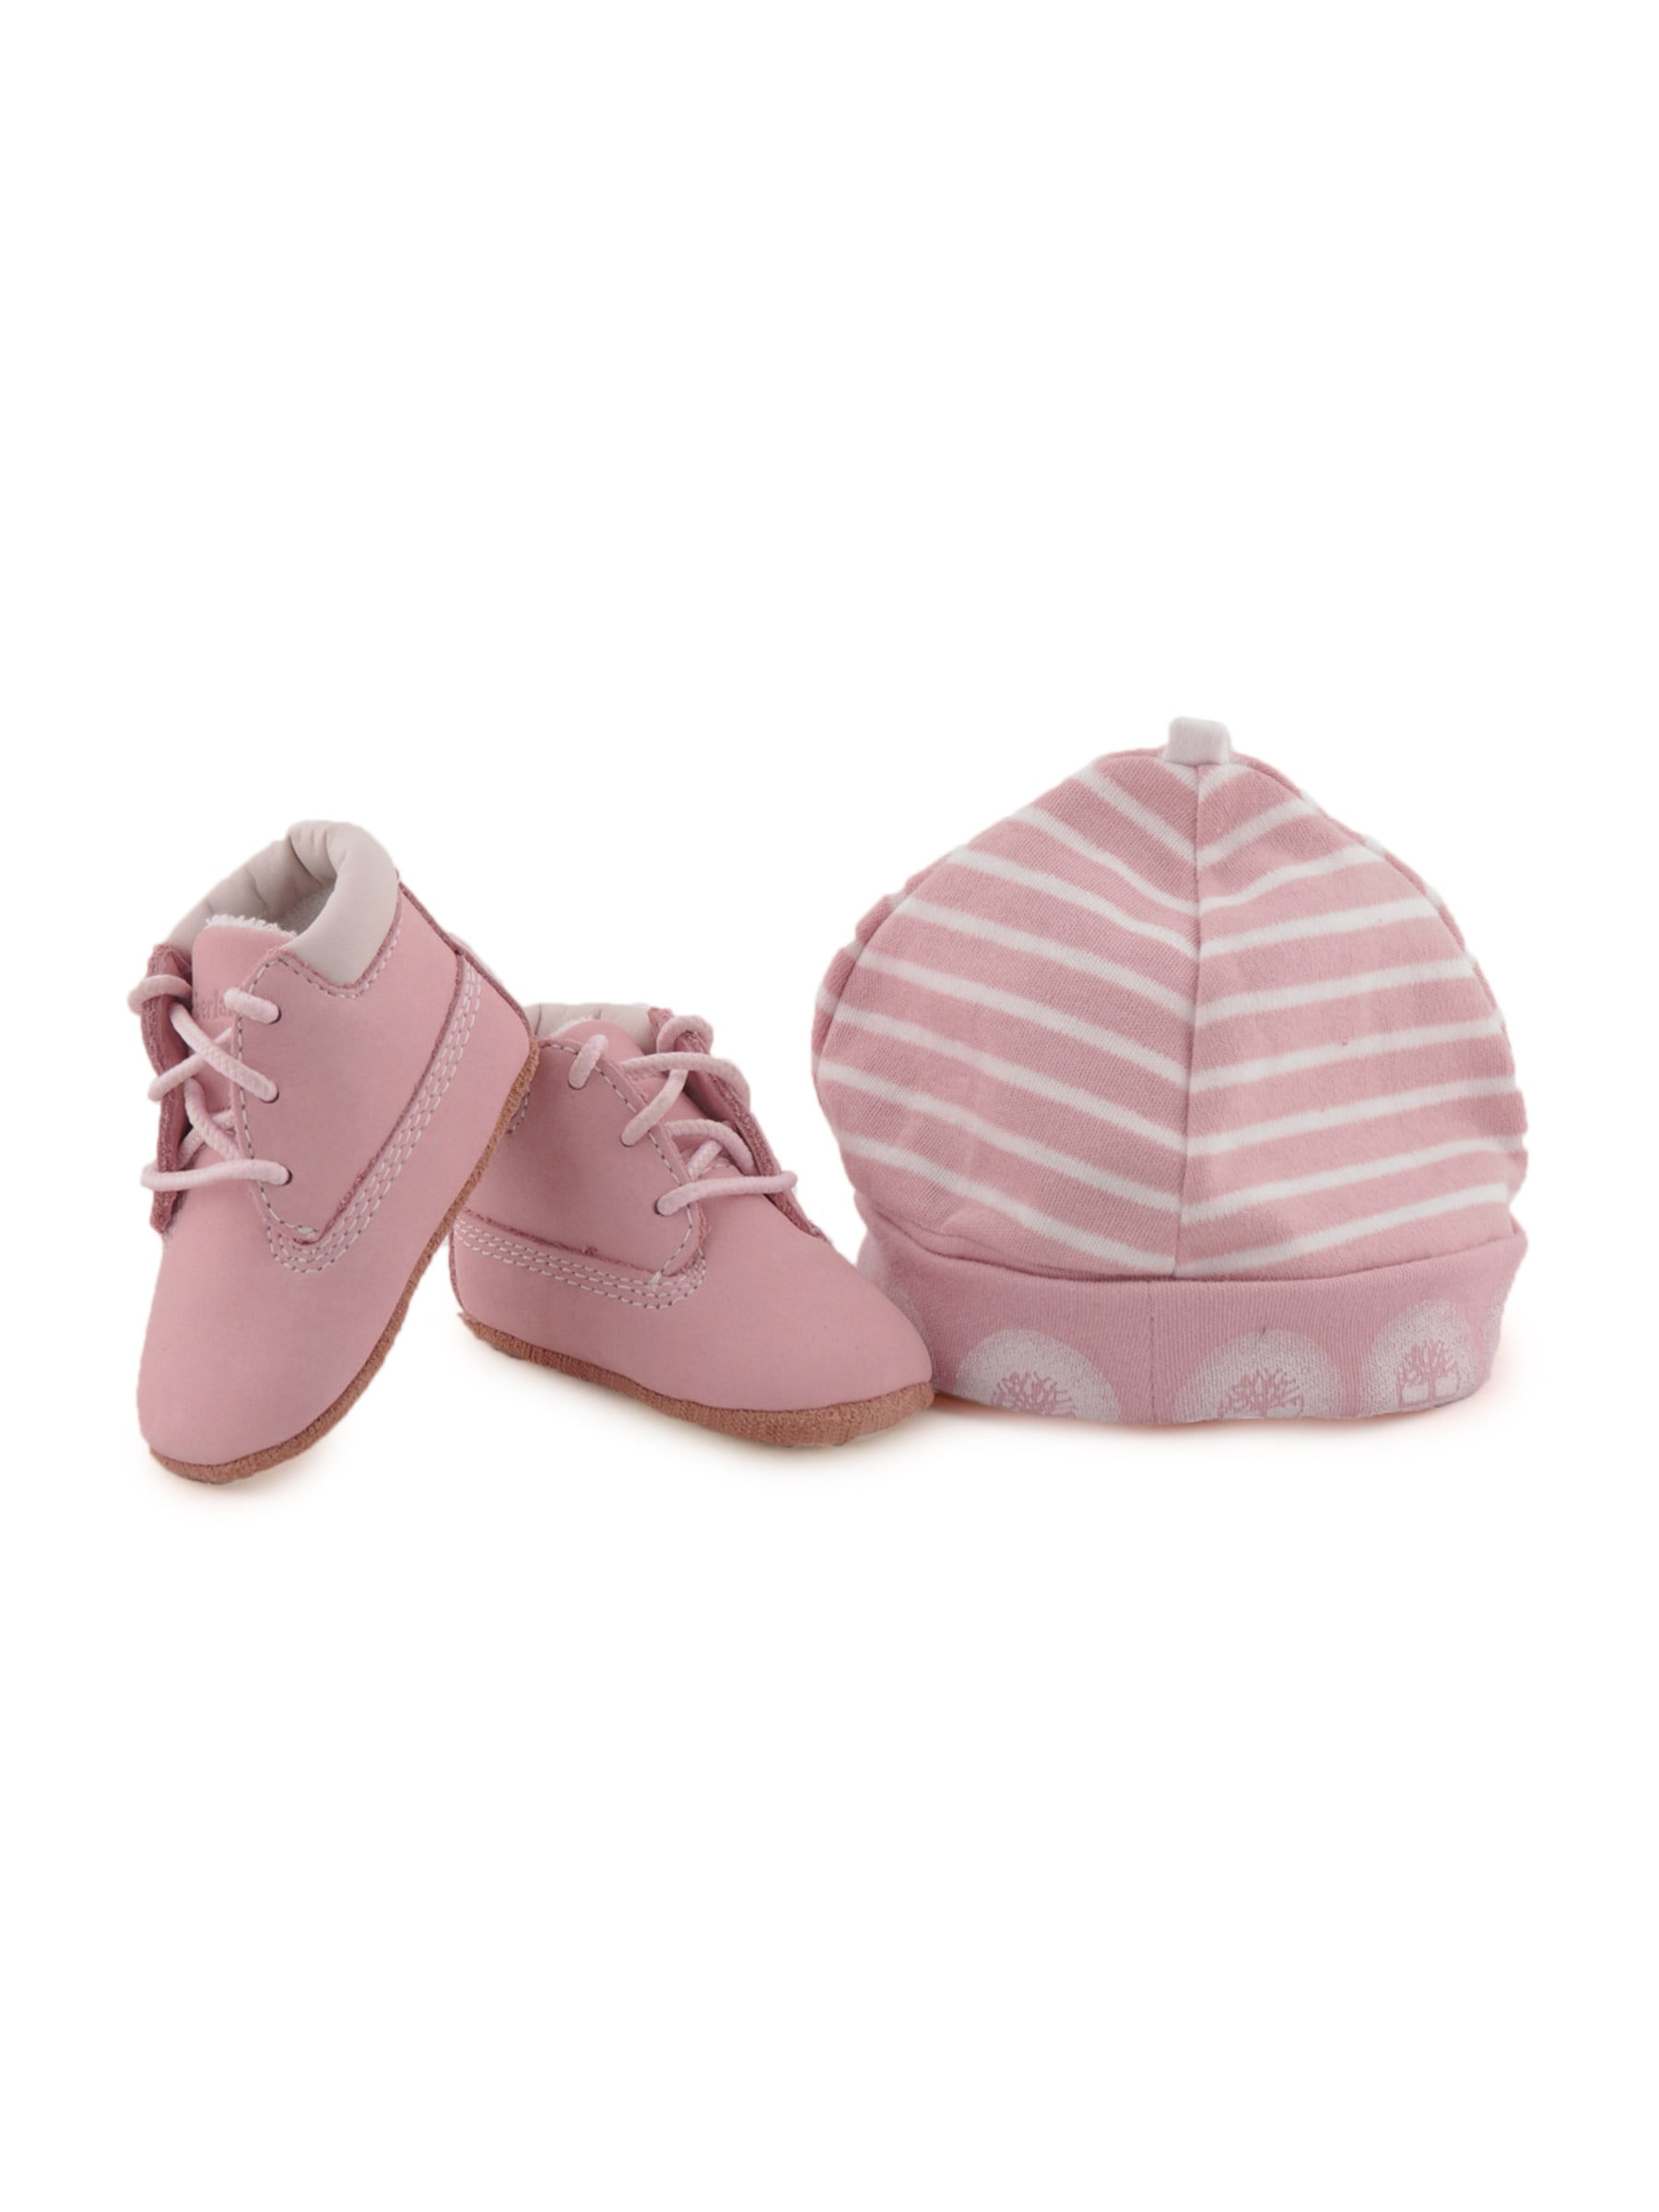 Timberland Unisex Casual Pink Casual Shoes